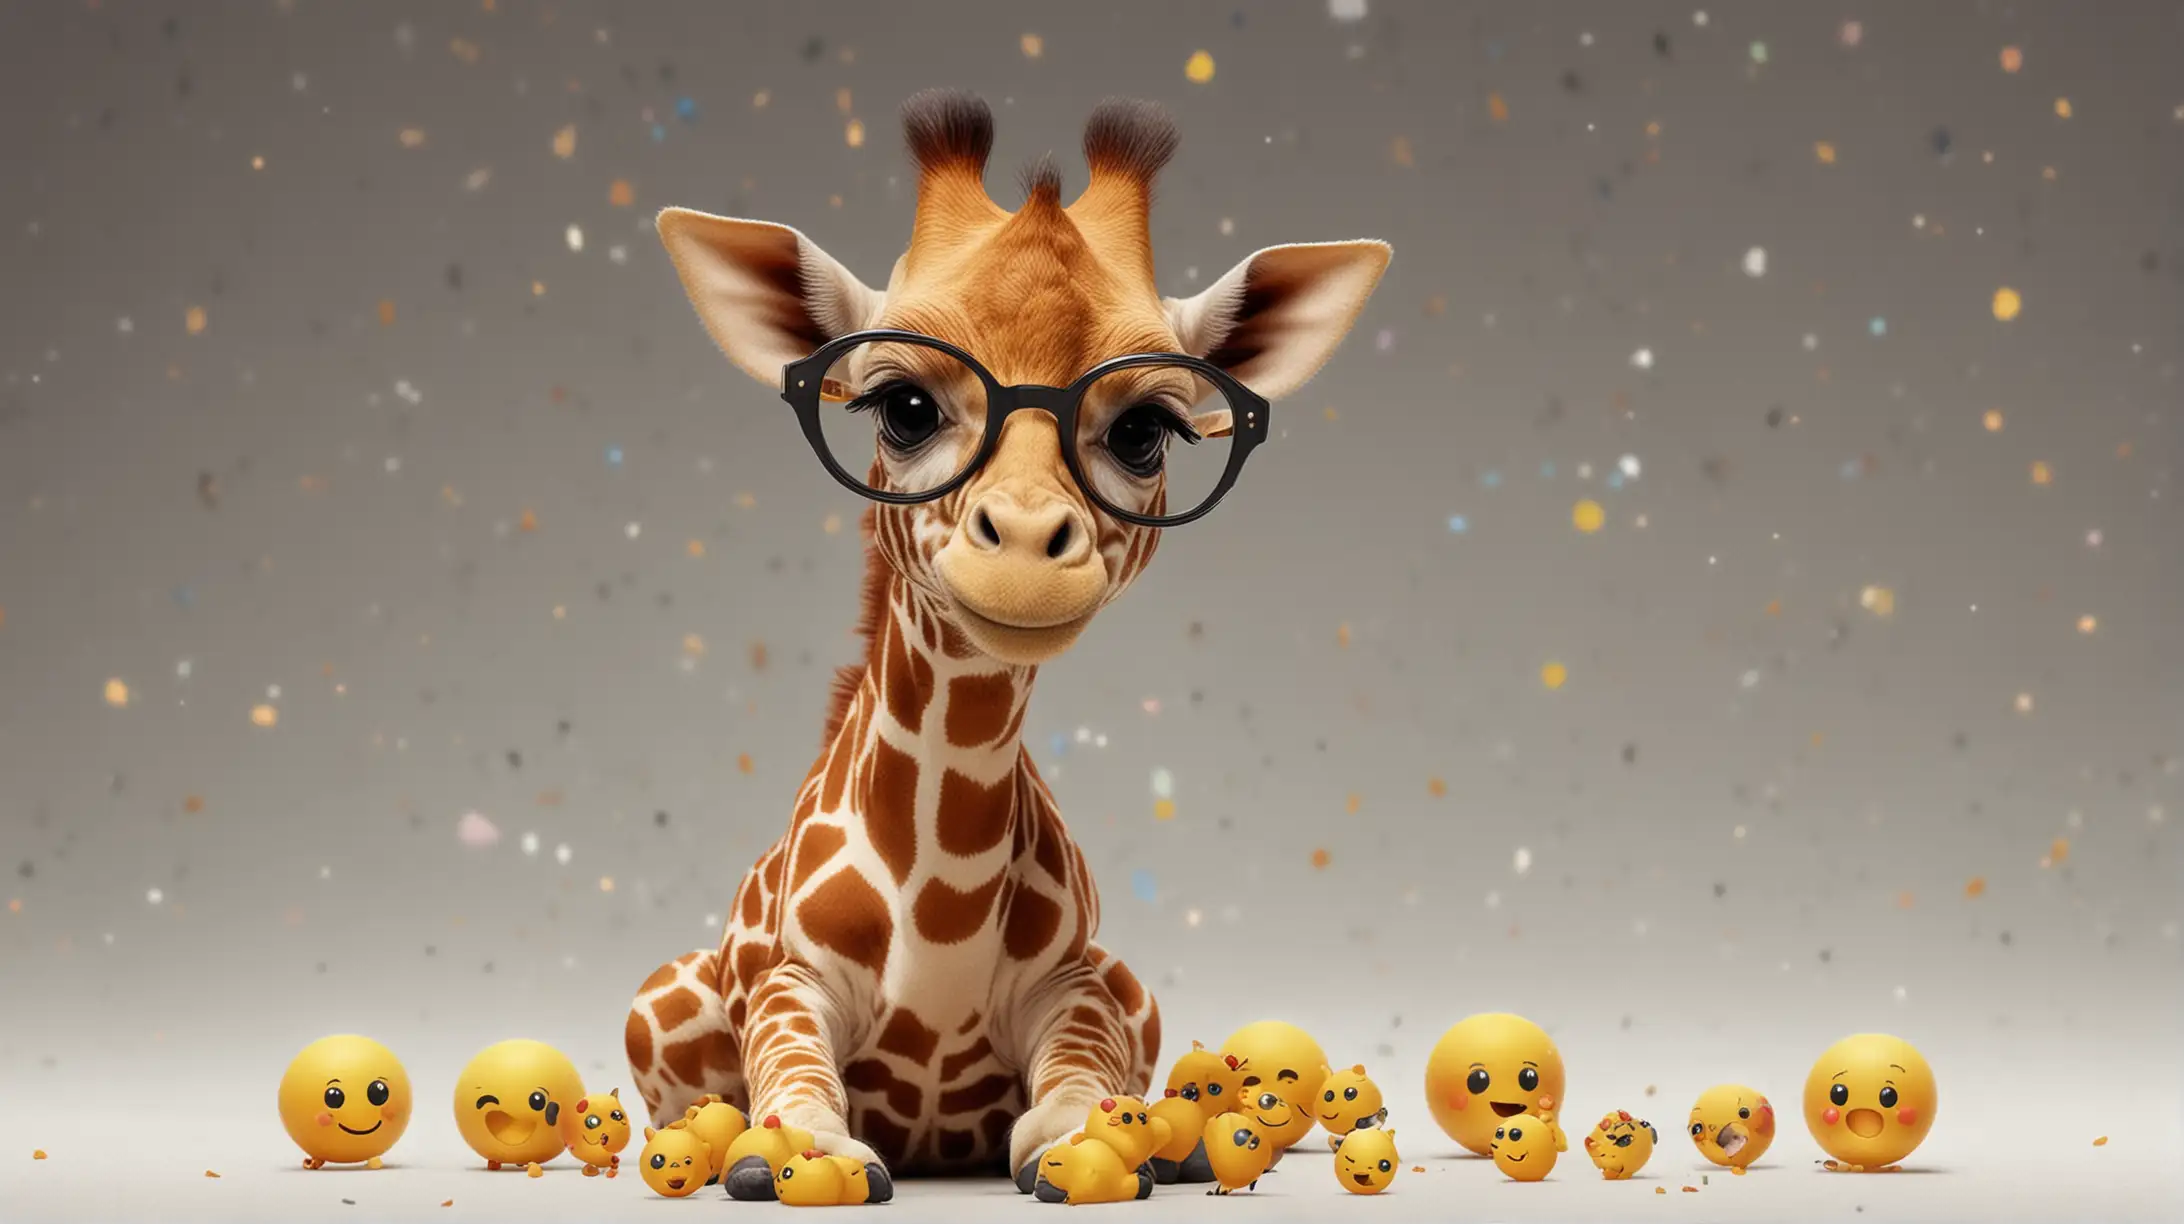 Adorable Baby Giraffe Wearing Glasses Explores Space with Playful Emojis